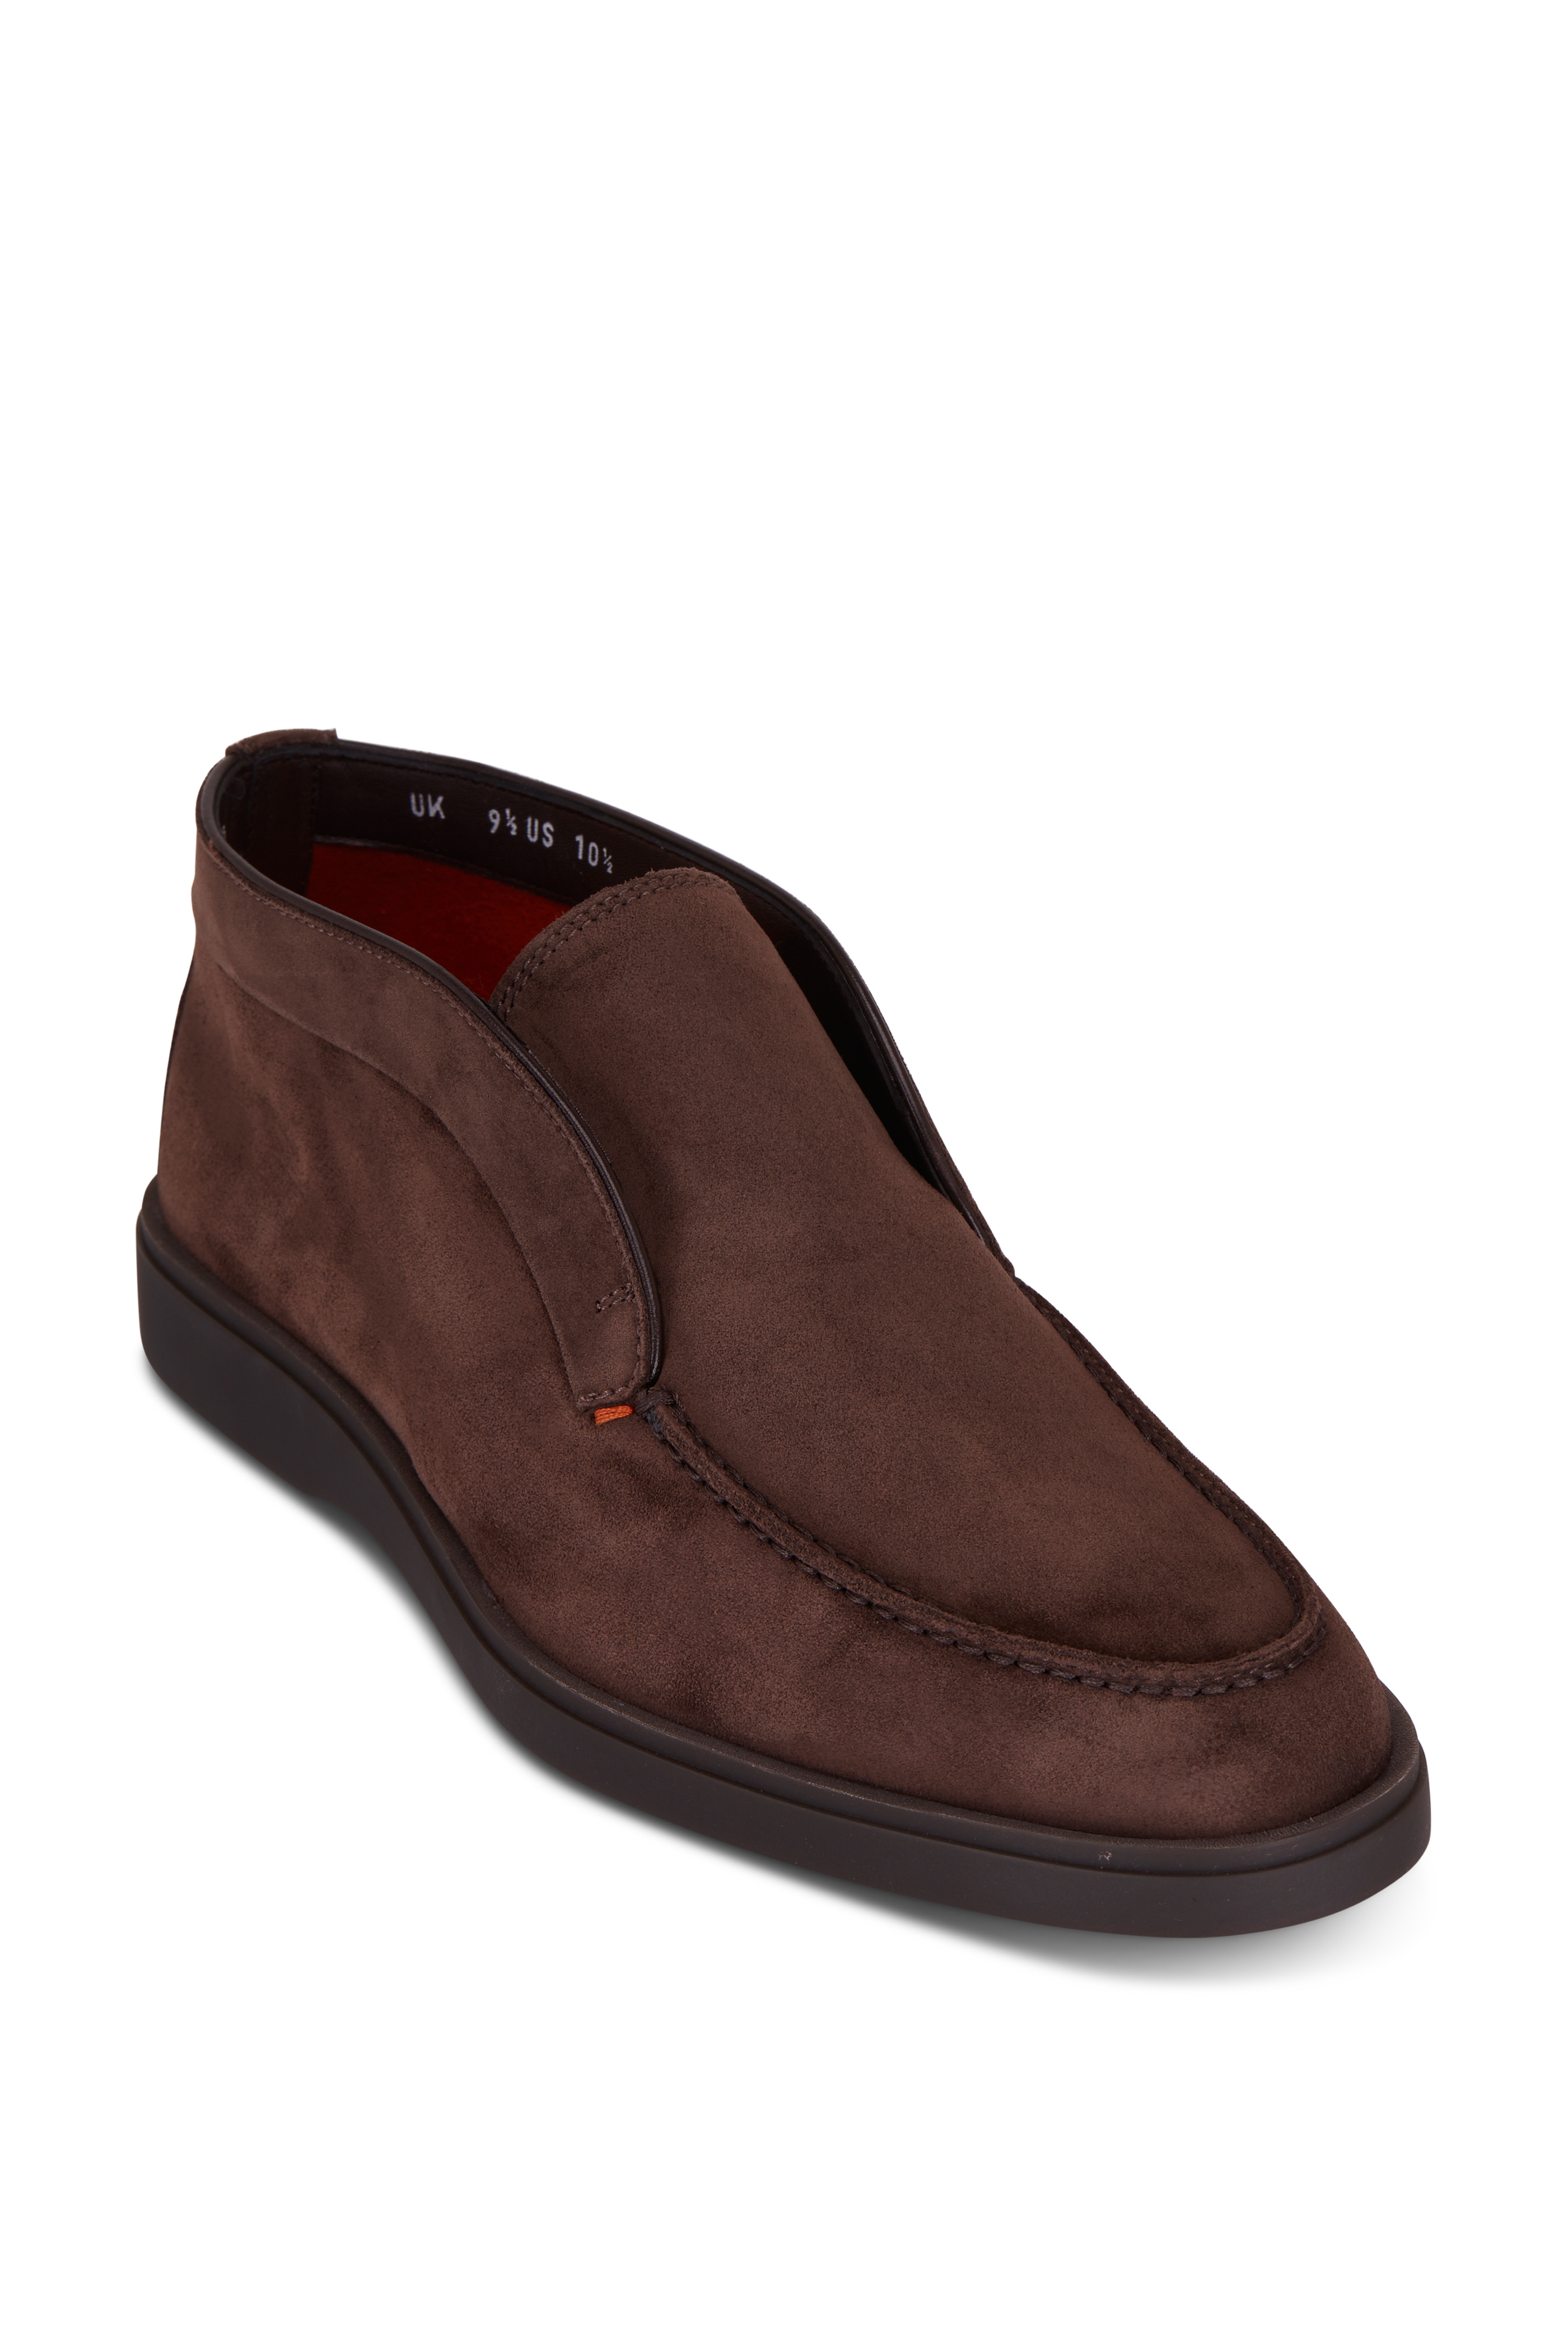 Zegna - New Trivero Tobacco Suede Boot | Mitchell Stores